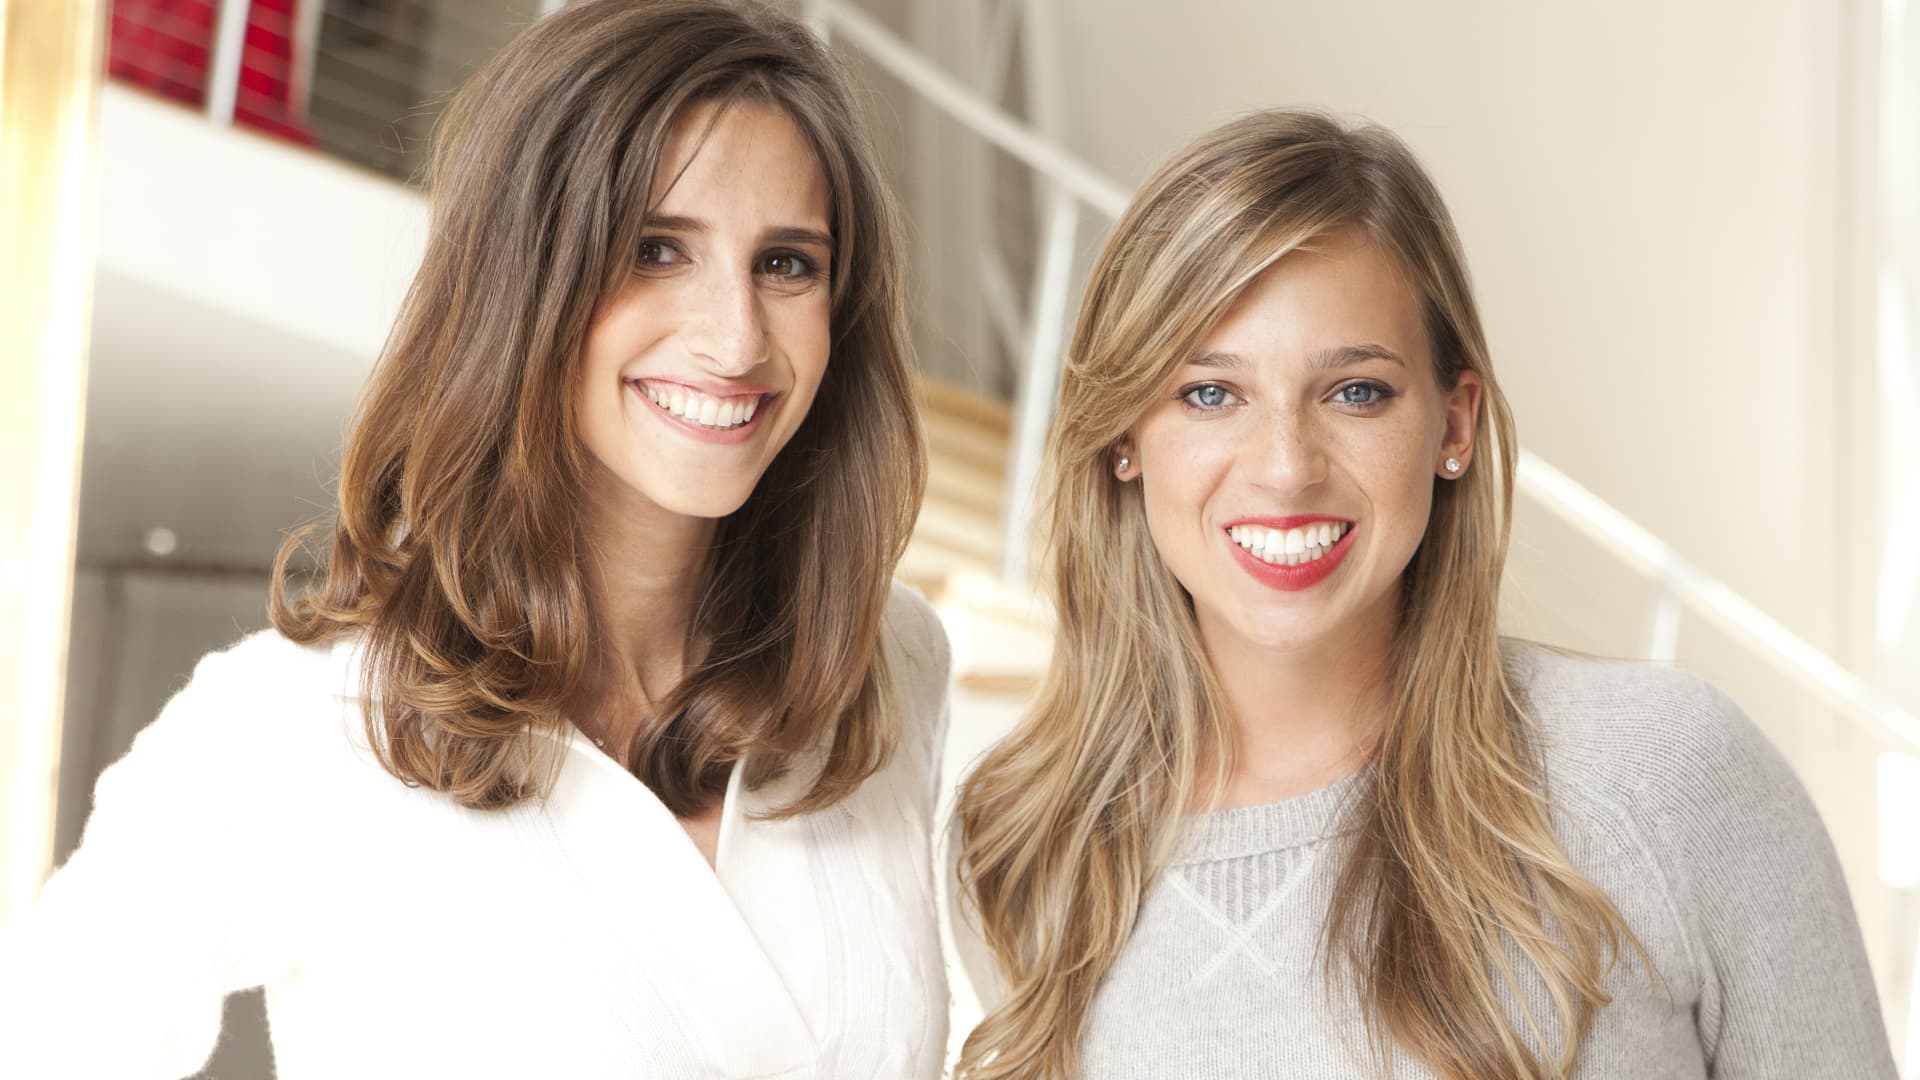 Carly Zakin and Danielle Weisberg launched theSkimm in 2012, a daily newsletter aimed at millennials.